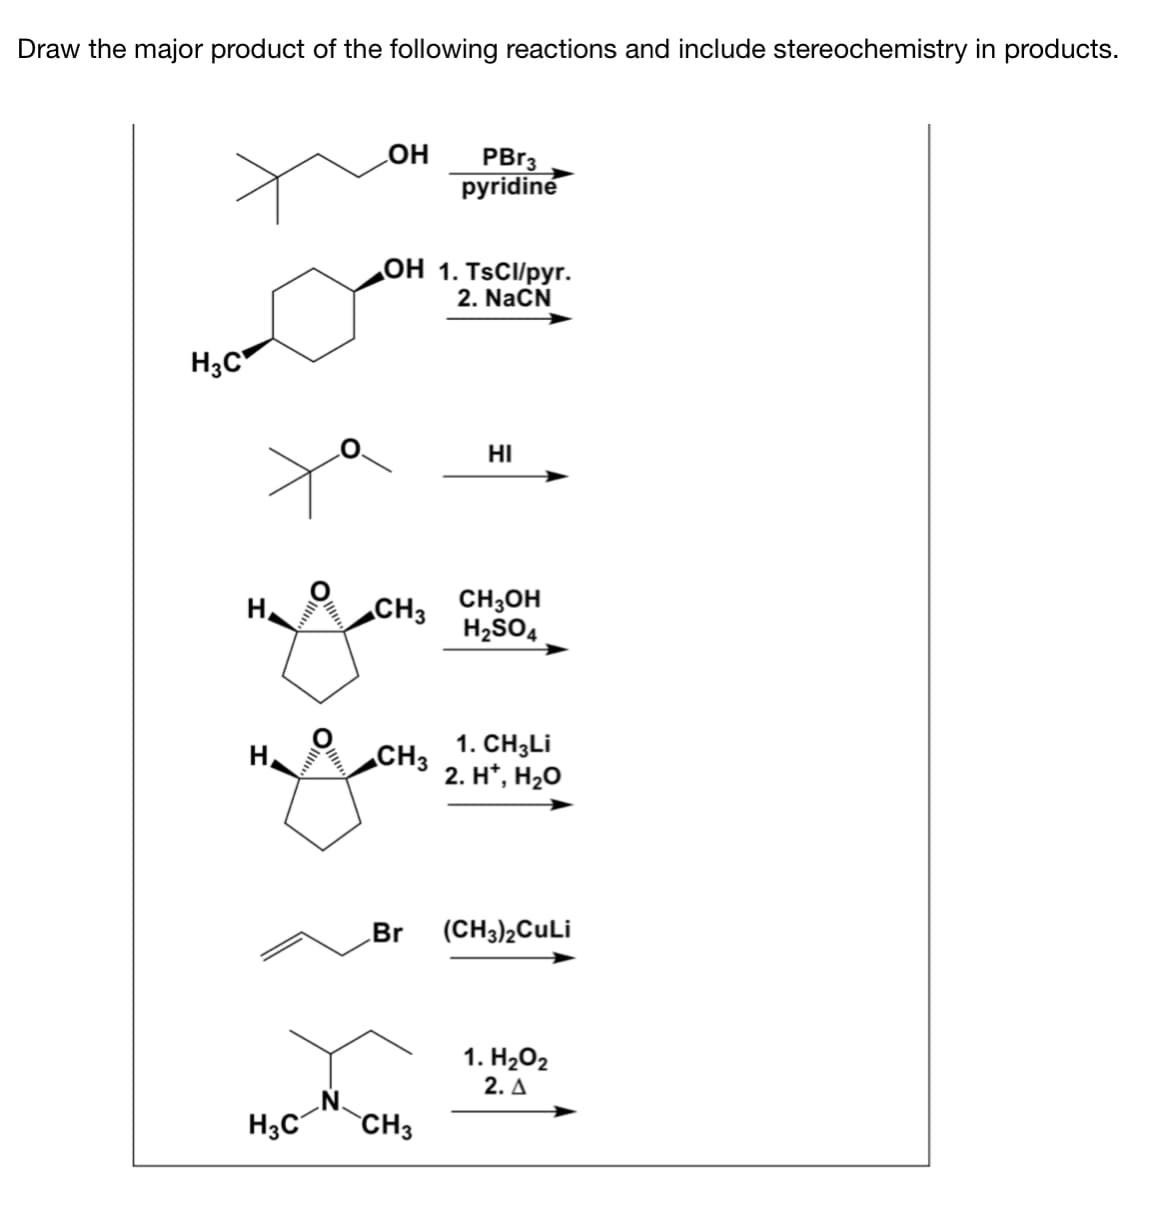 Draw the major product of the following reactions and include stereochemistry in products.
LOH
PBR3
pyridine
оН 1. TsCl/pyг.
2. NaCN
H3C
HI
CH3 CH3OH
H2SO4
H,
1. CH3LI
2. H', На0
H.
CH3
Br
(CH3)2CuLi
1. H202
2. A
H3C
CH3
